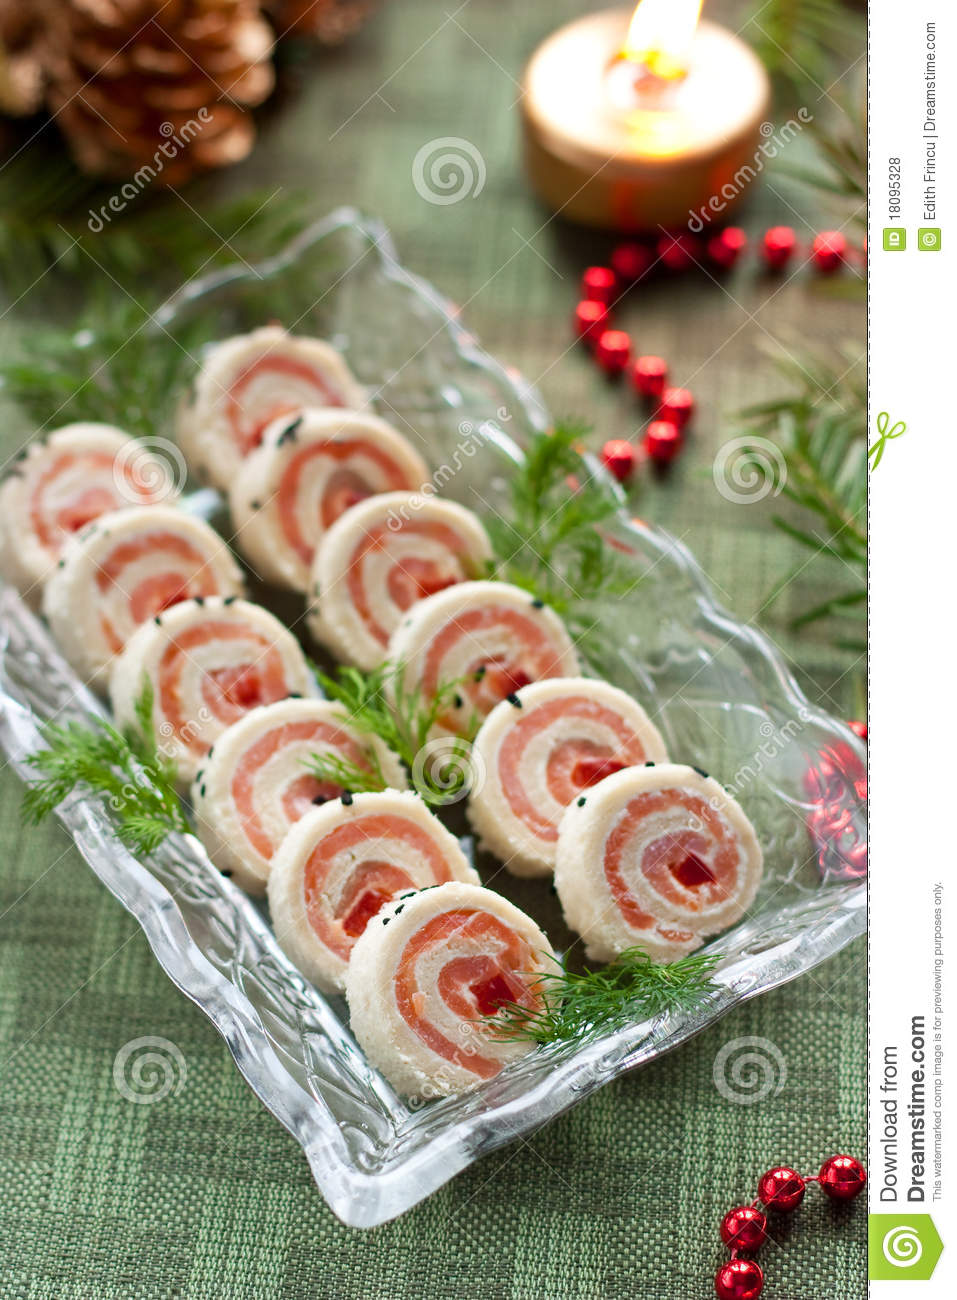 Salmon Bread Rolls Appetizers Royalty Free Stock Photos   Image